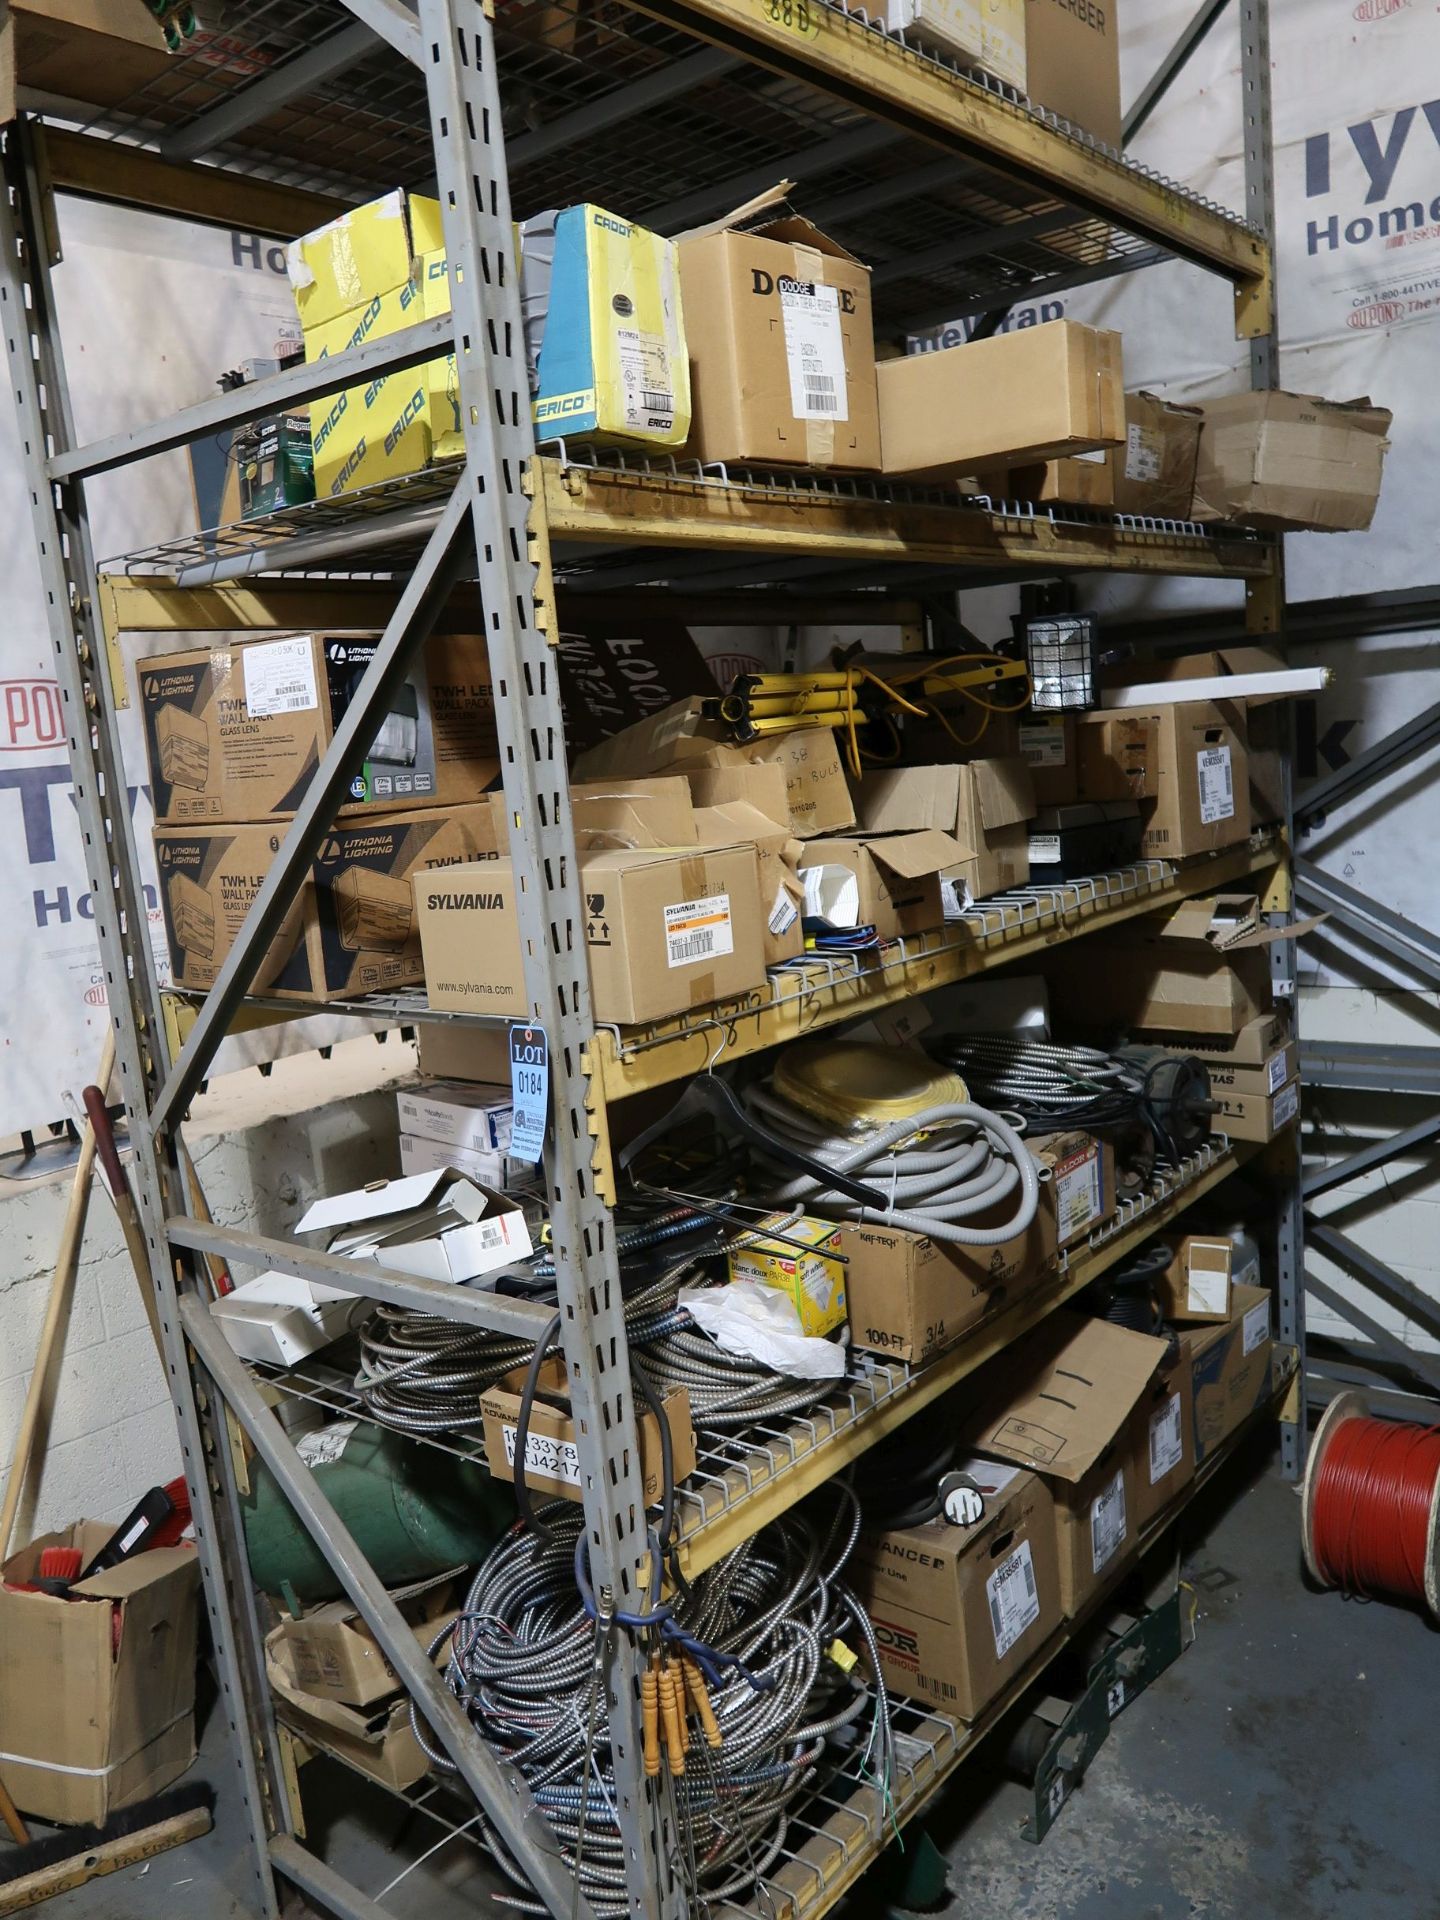 (LOT) CONTENTS OF RACK INCLUDING LIGHTING, MOTORS & WIRE